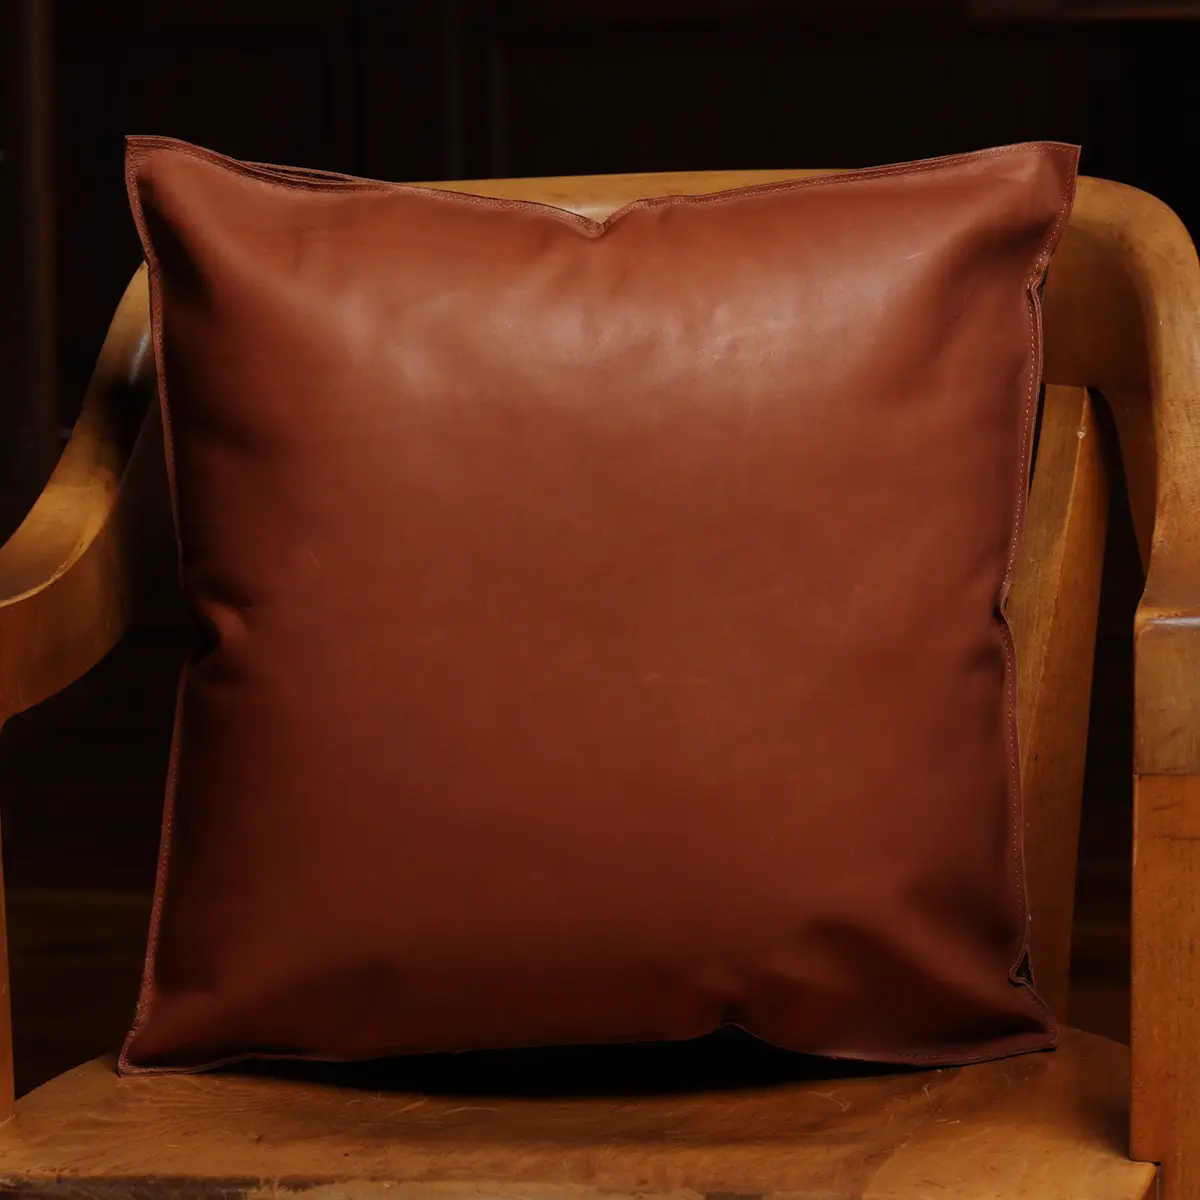 Full-Grain Leather Pillow, American Made